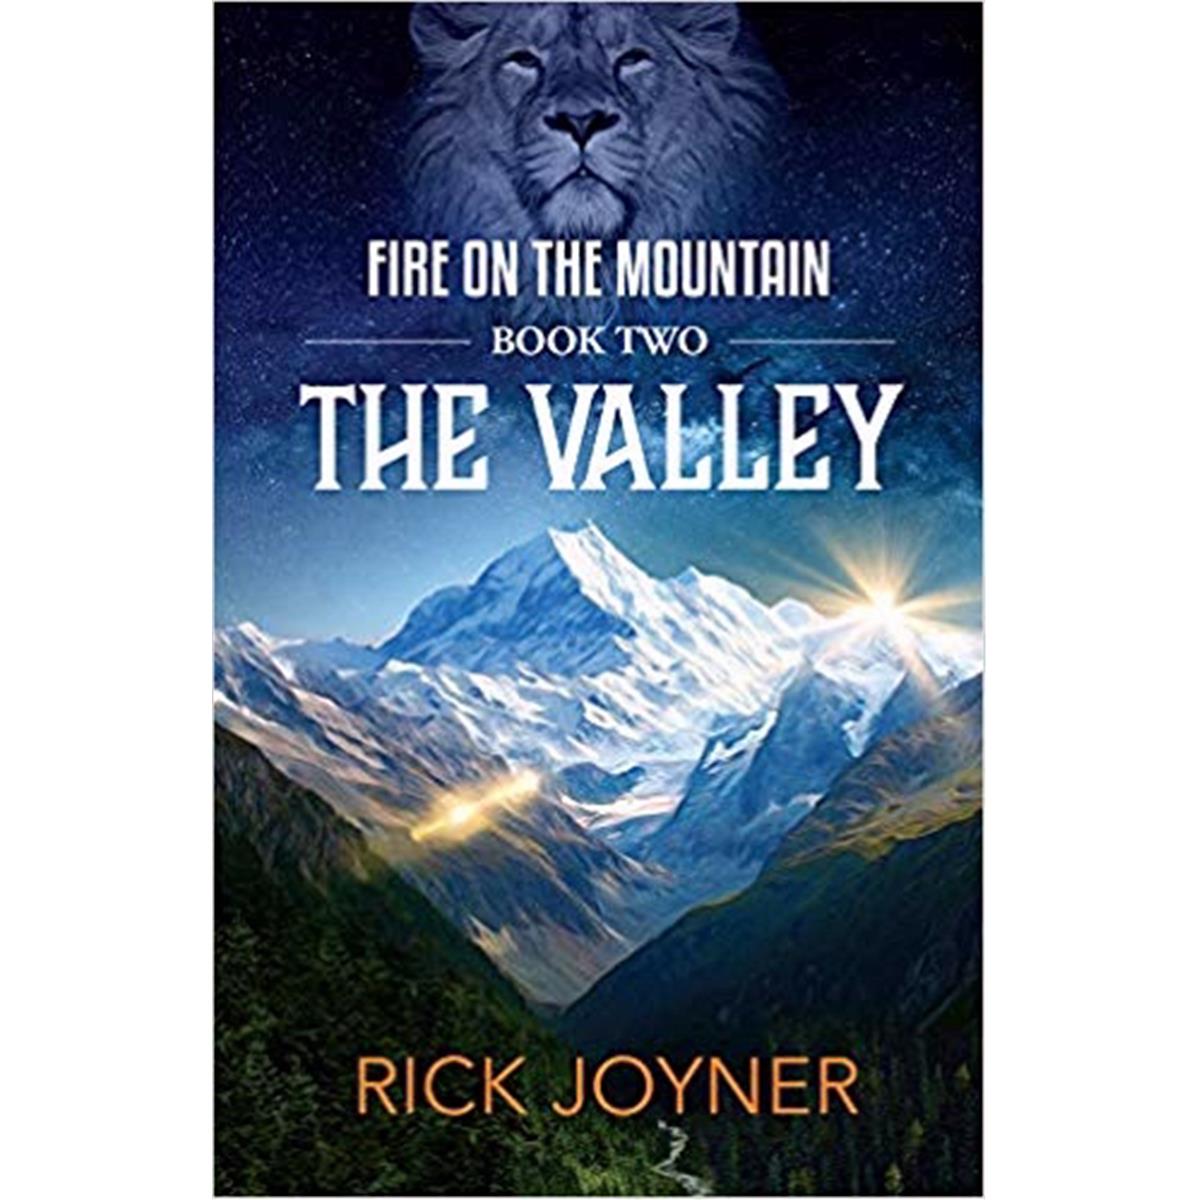 135661 The Valley - Fire On The Mountain Series No.2